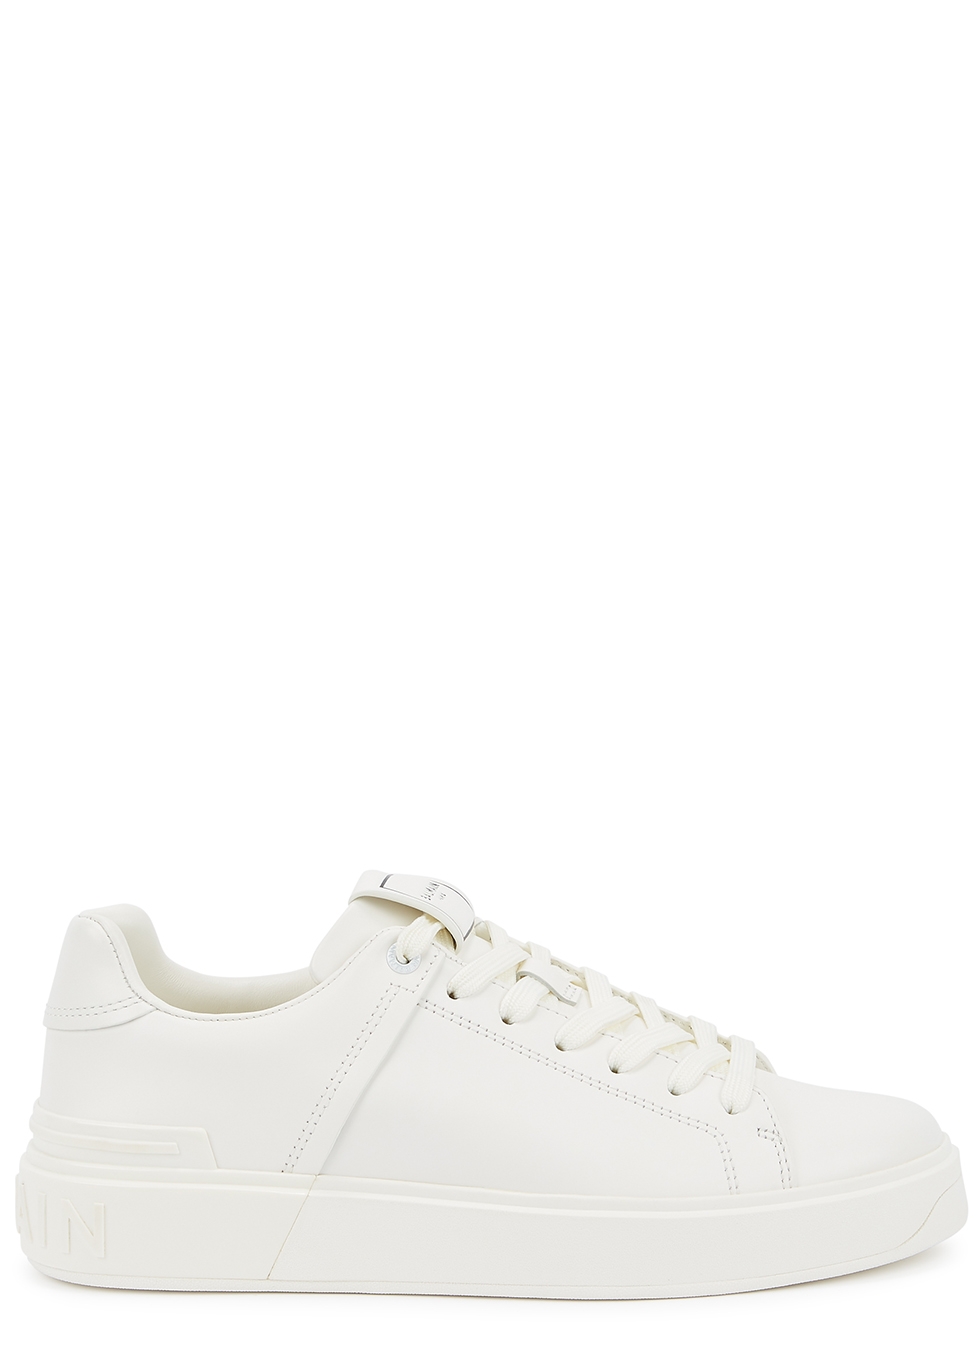 B-Court white leather sneakers